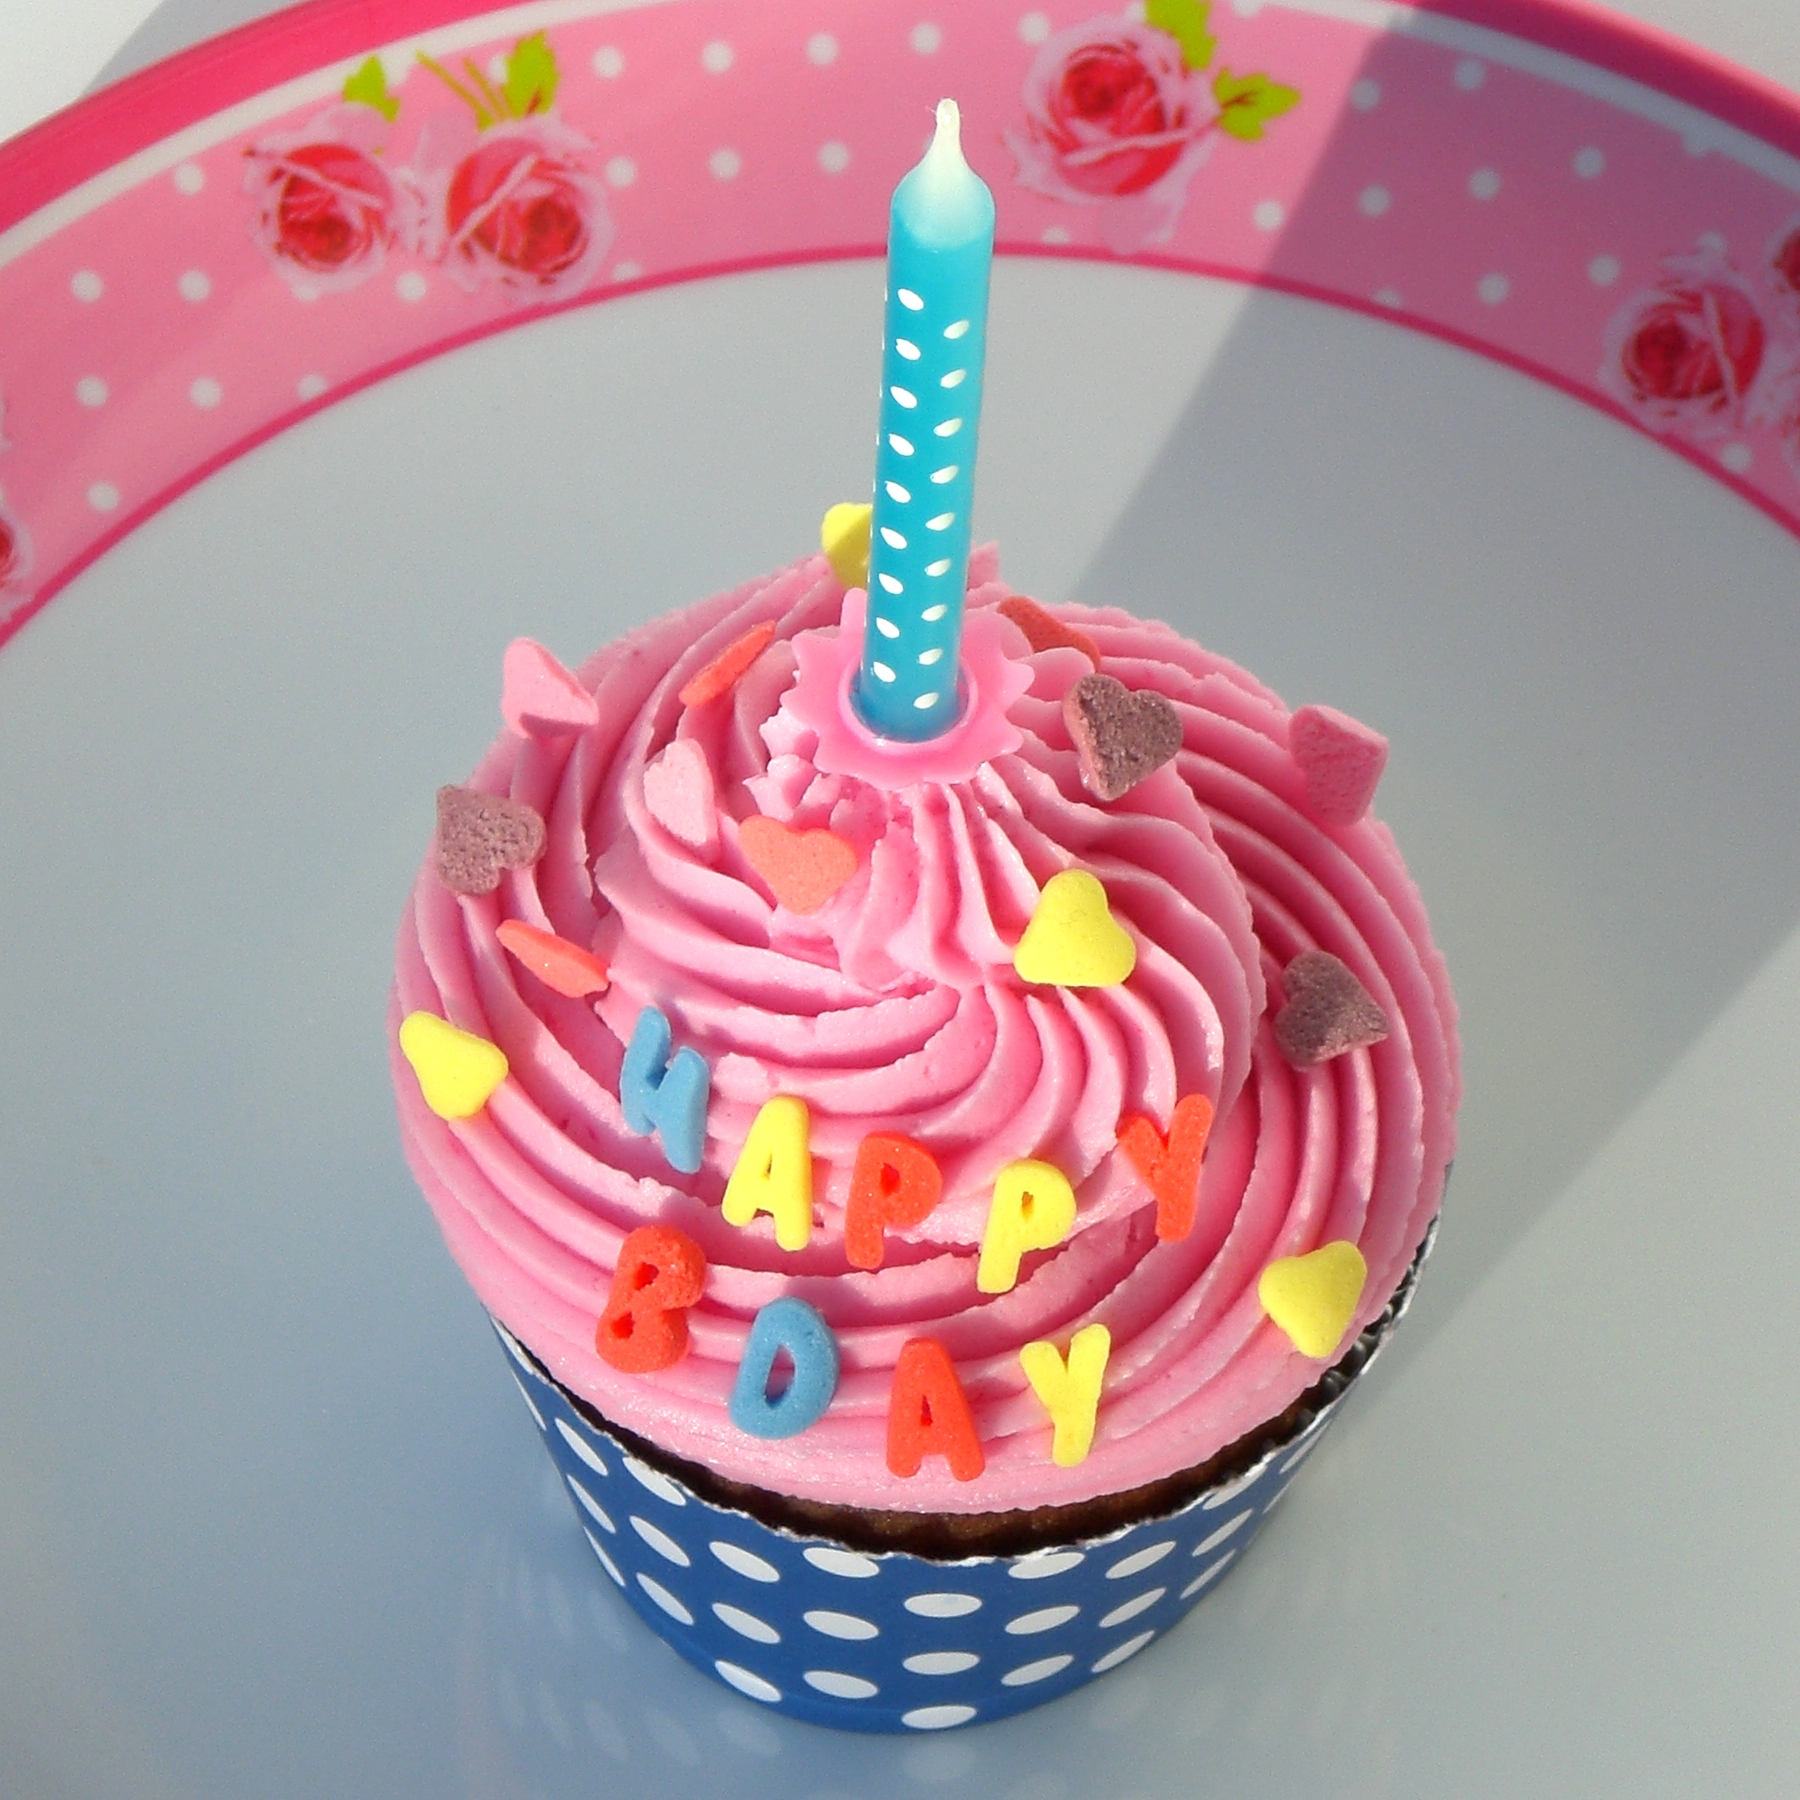 a pink cupcake topped with a lit candle sitting in front of a pink wall